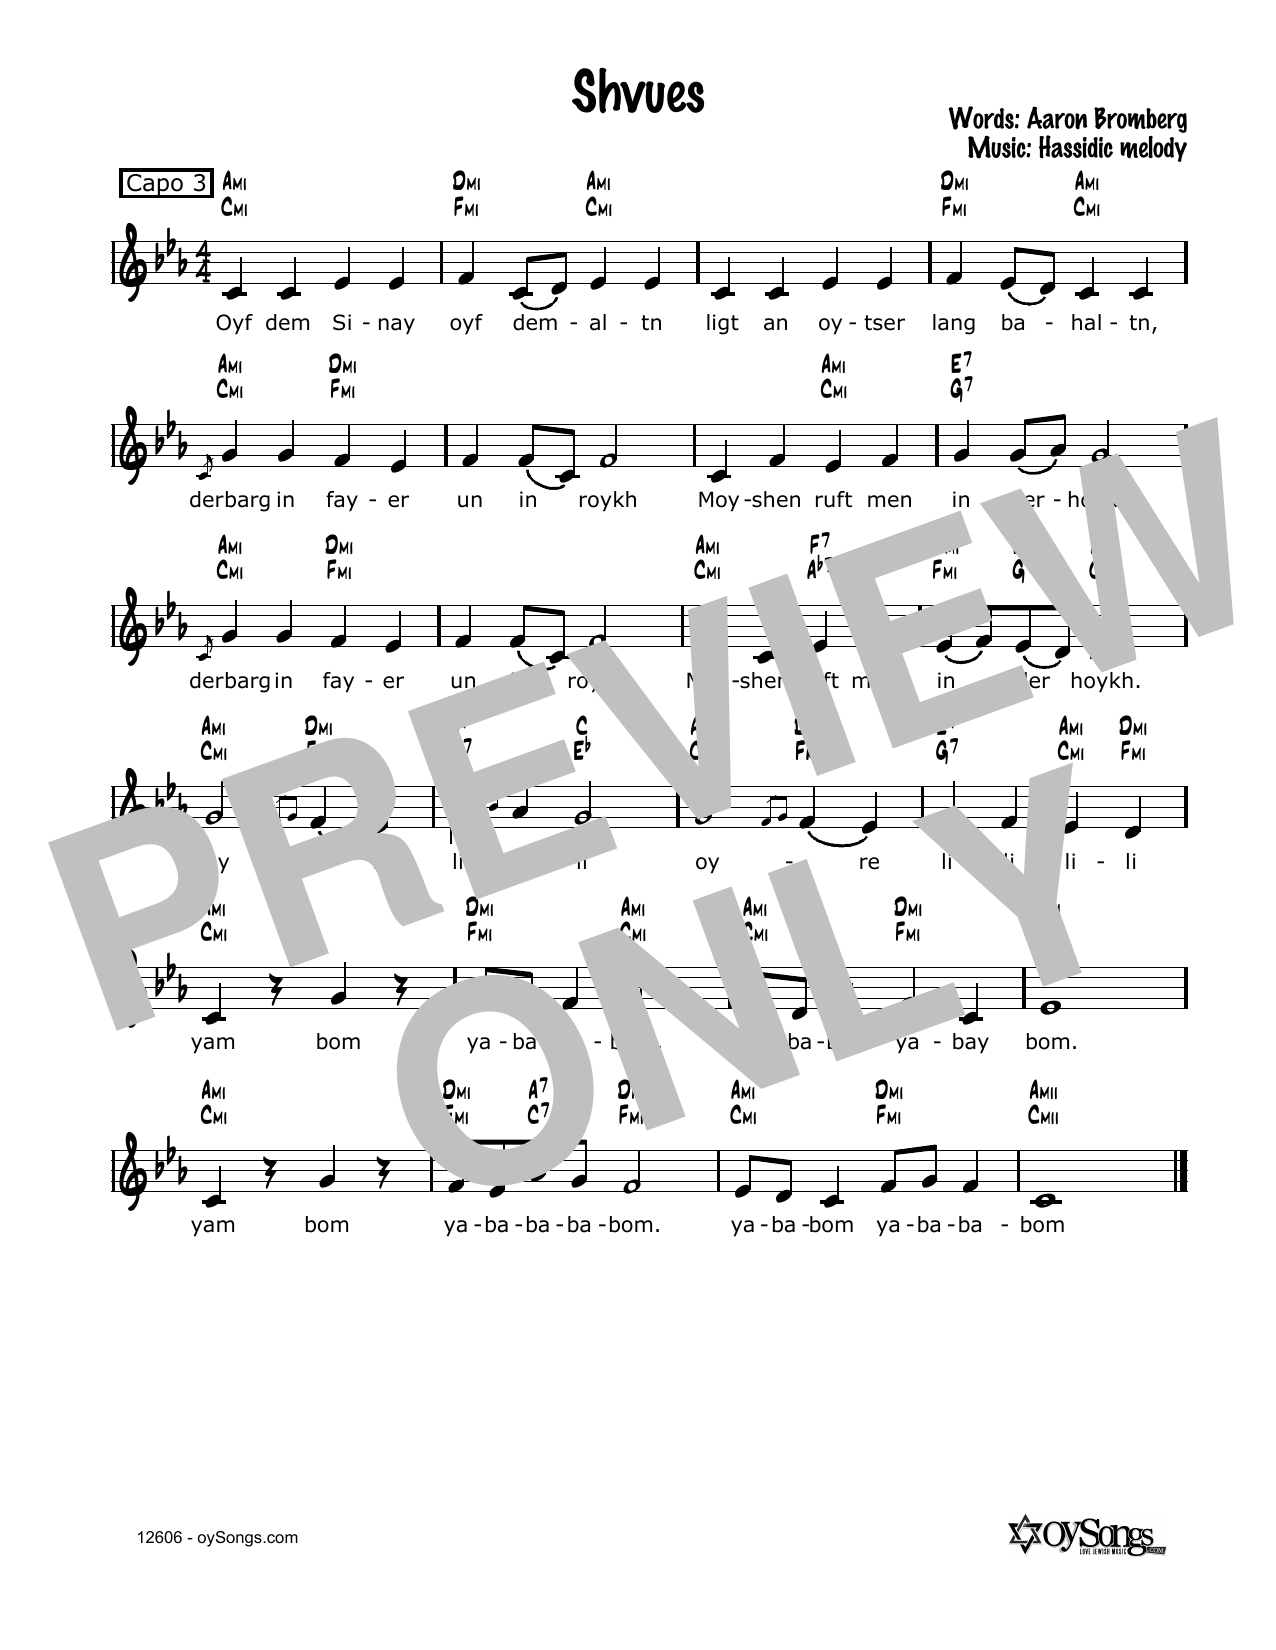 Download Cindy Paley Shvues Sheet Music